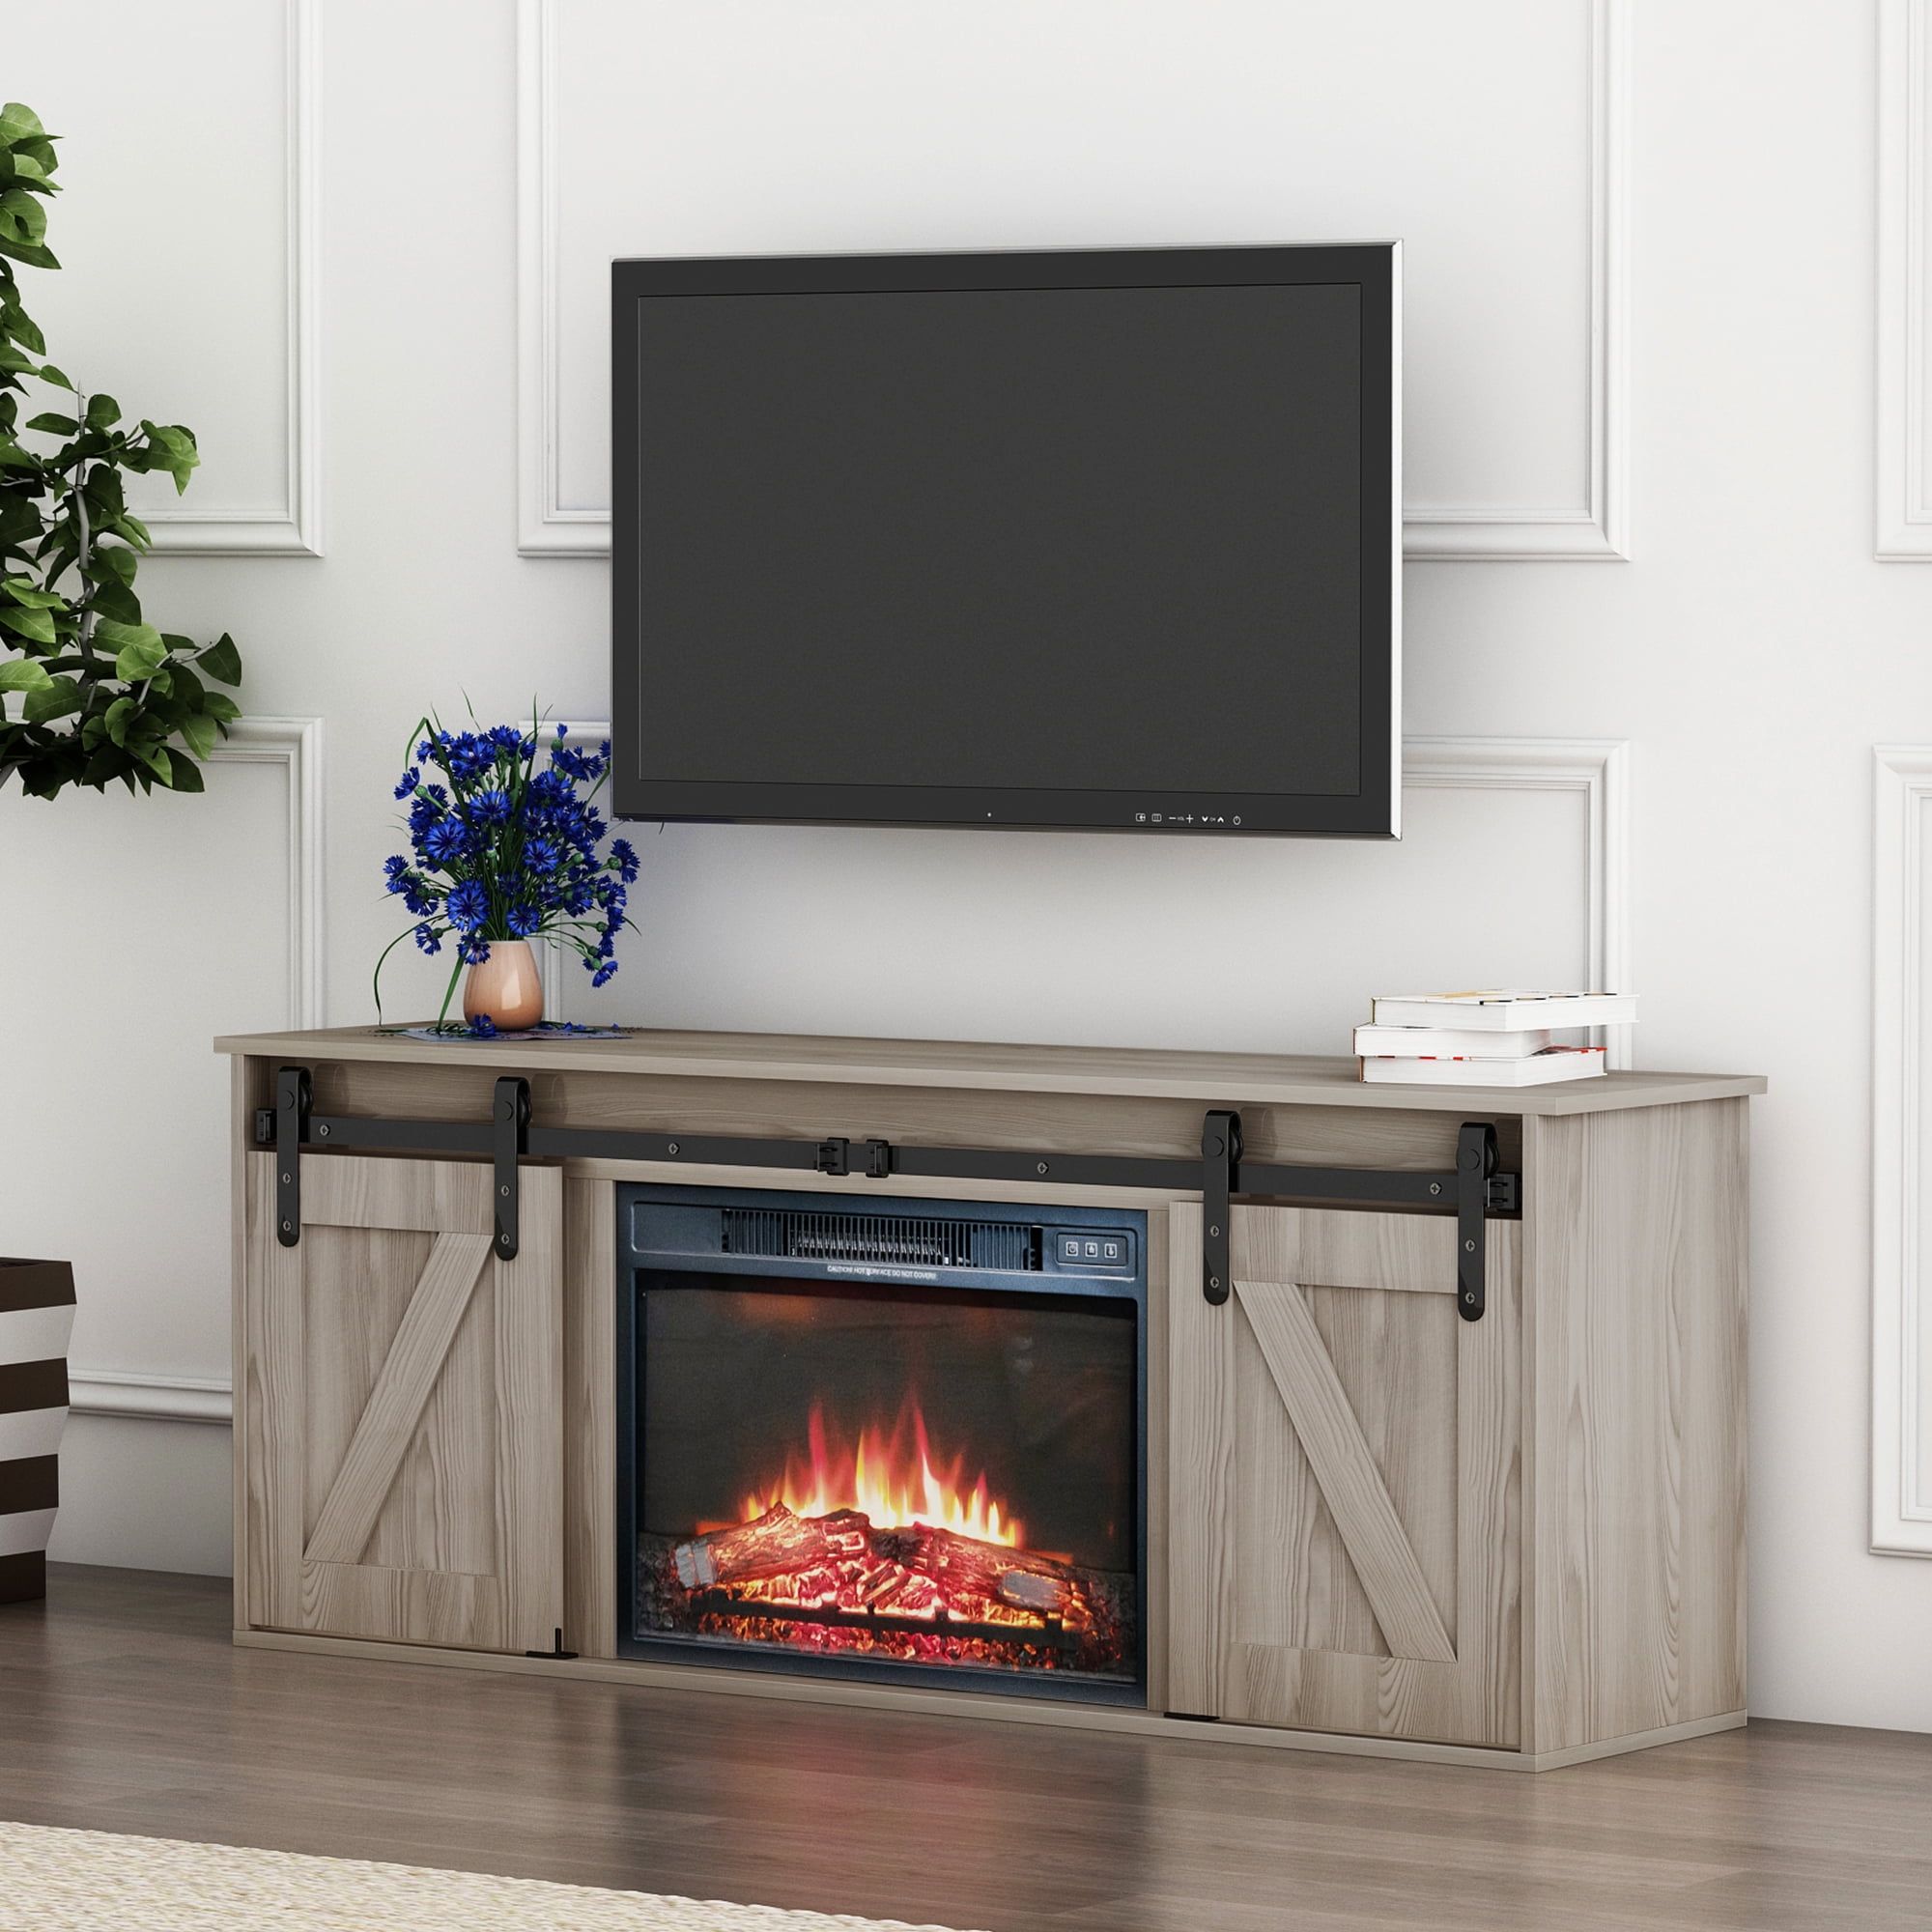 Btmway Electric Fireplace Tv Stand, Farmhouse Media Entertainment Center  Television Console Table, Barn Door Tv Cabinet With Adjustable Shelf &  Remote, Fireplace Tv Stand For 65 Inch Tv, Antique Grey – Walmart In Farmhouse Media Entertainment Centers (View 5 of 15)